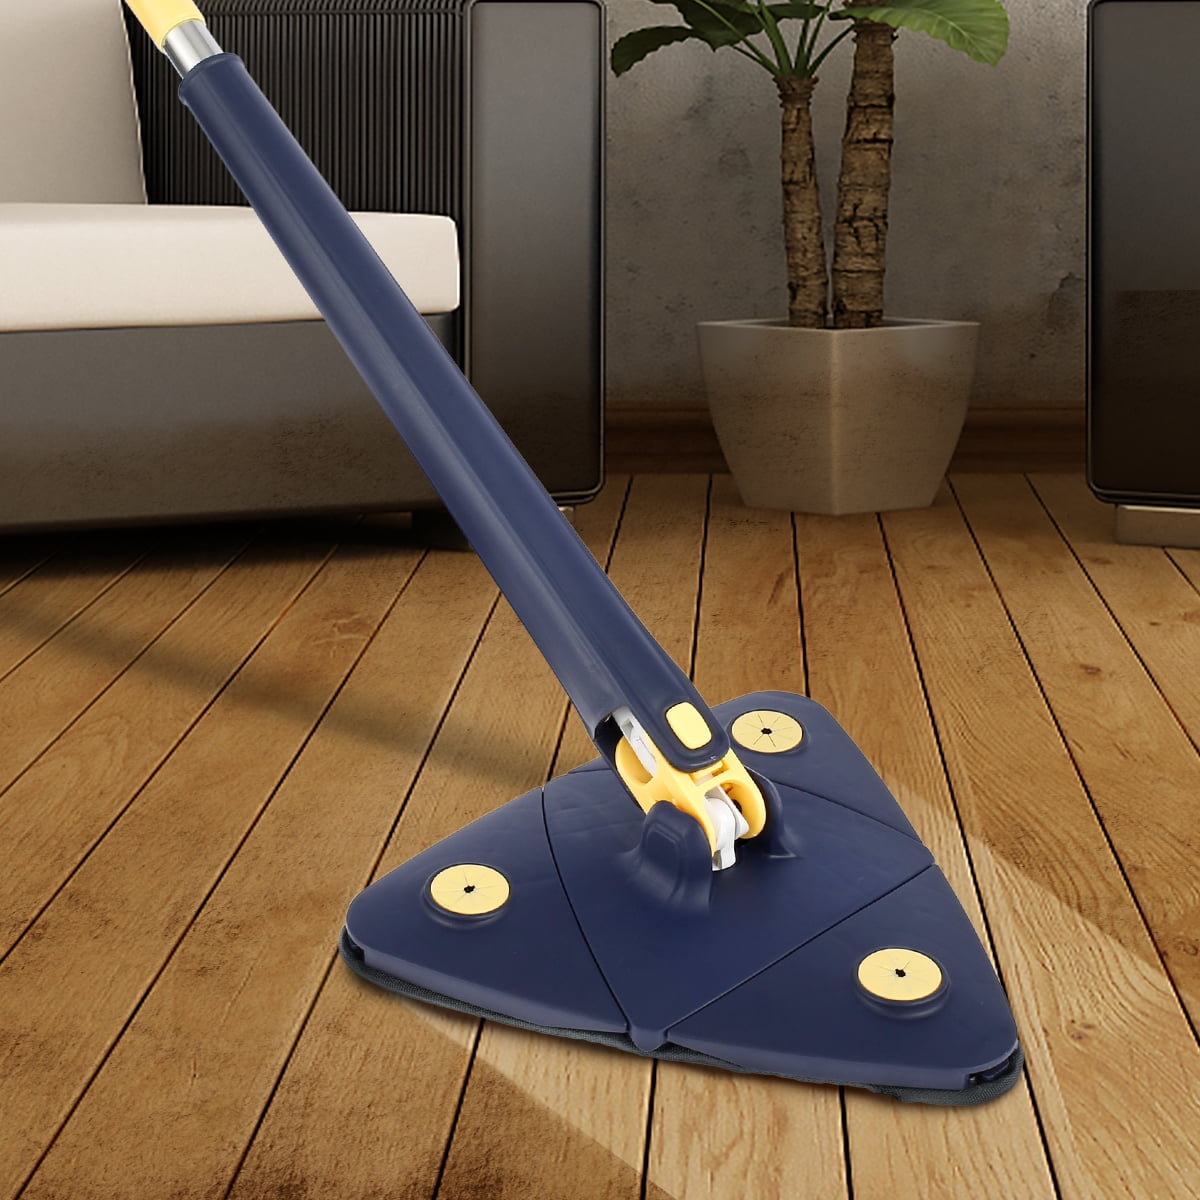 Lieonvis Cleaning Mop,360 Degrees Rotatable Adjustable Wall Mop Cleaner  Extendable 51Inch Triangle Automatic Water Squeezing Mop with 2 Replacement